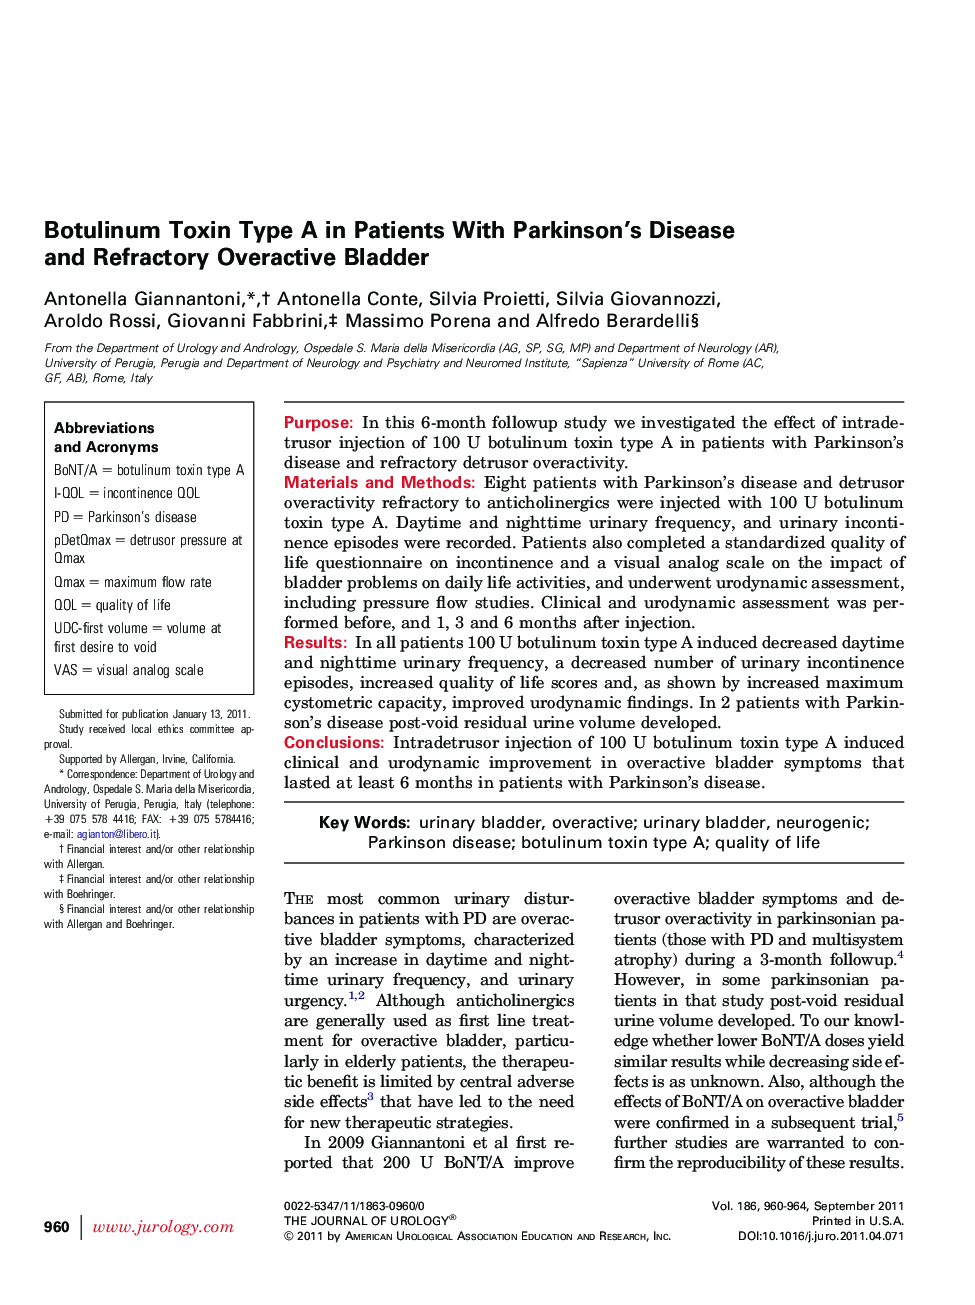 Botulinum Toxin Type A in Patients With Parkinson's Disease and Refractory Overactive Bladder 